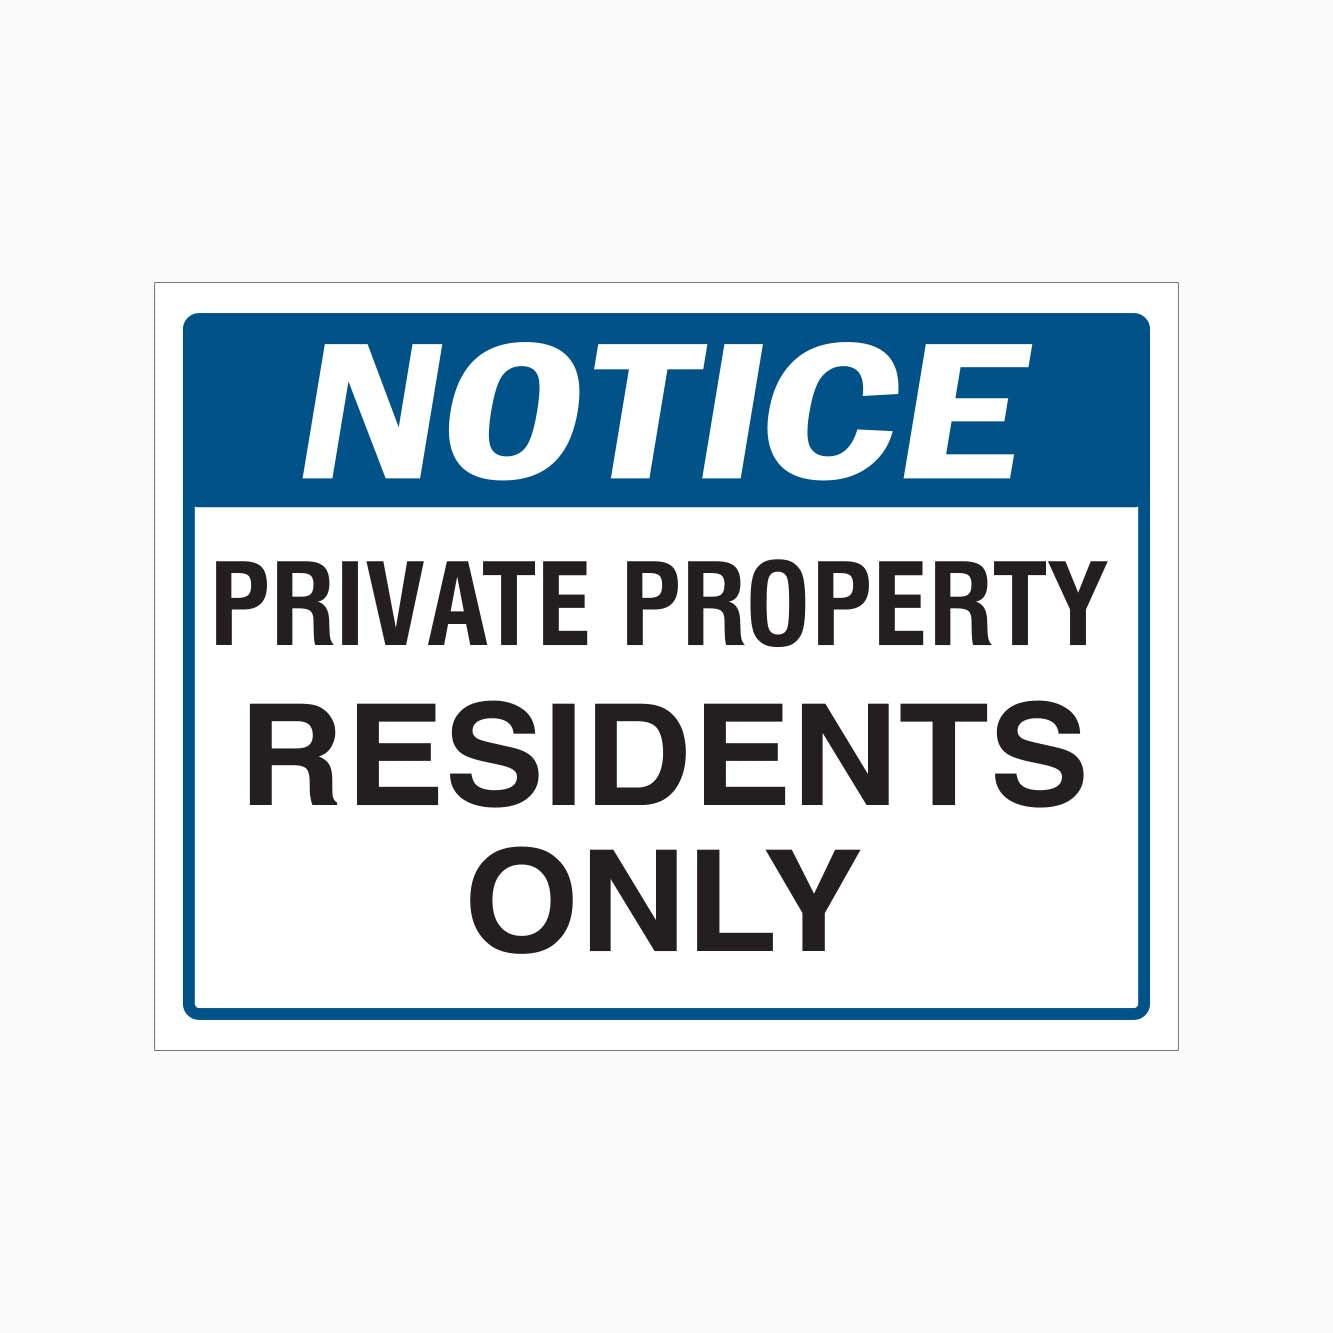 NOTICE PRIVATE PROPERTY RESIDENTS ONLY SIGN - GET SIGNS